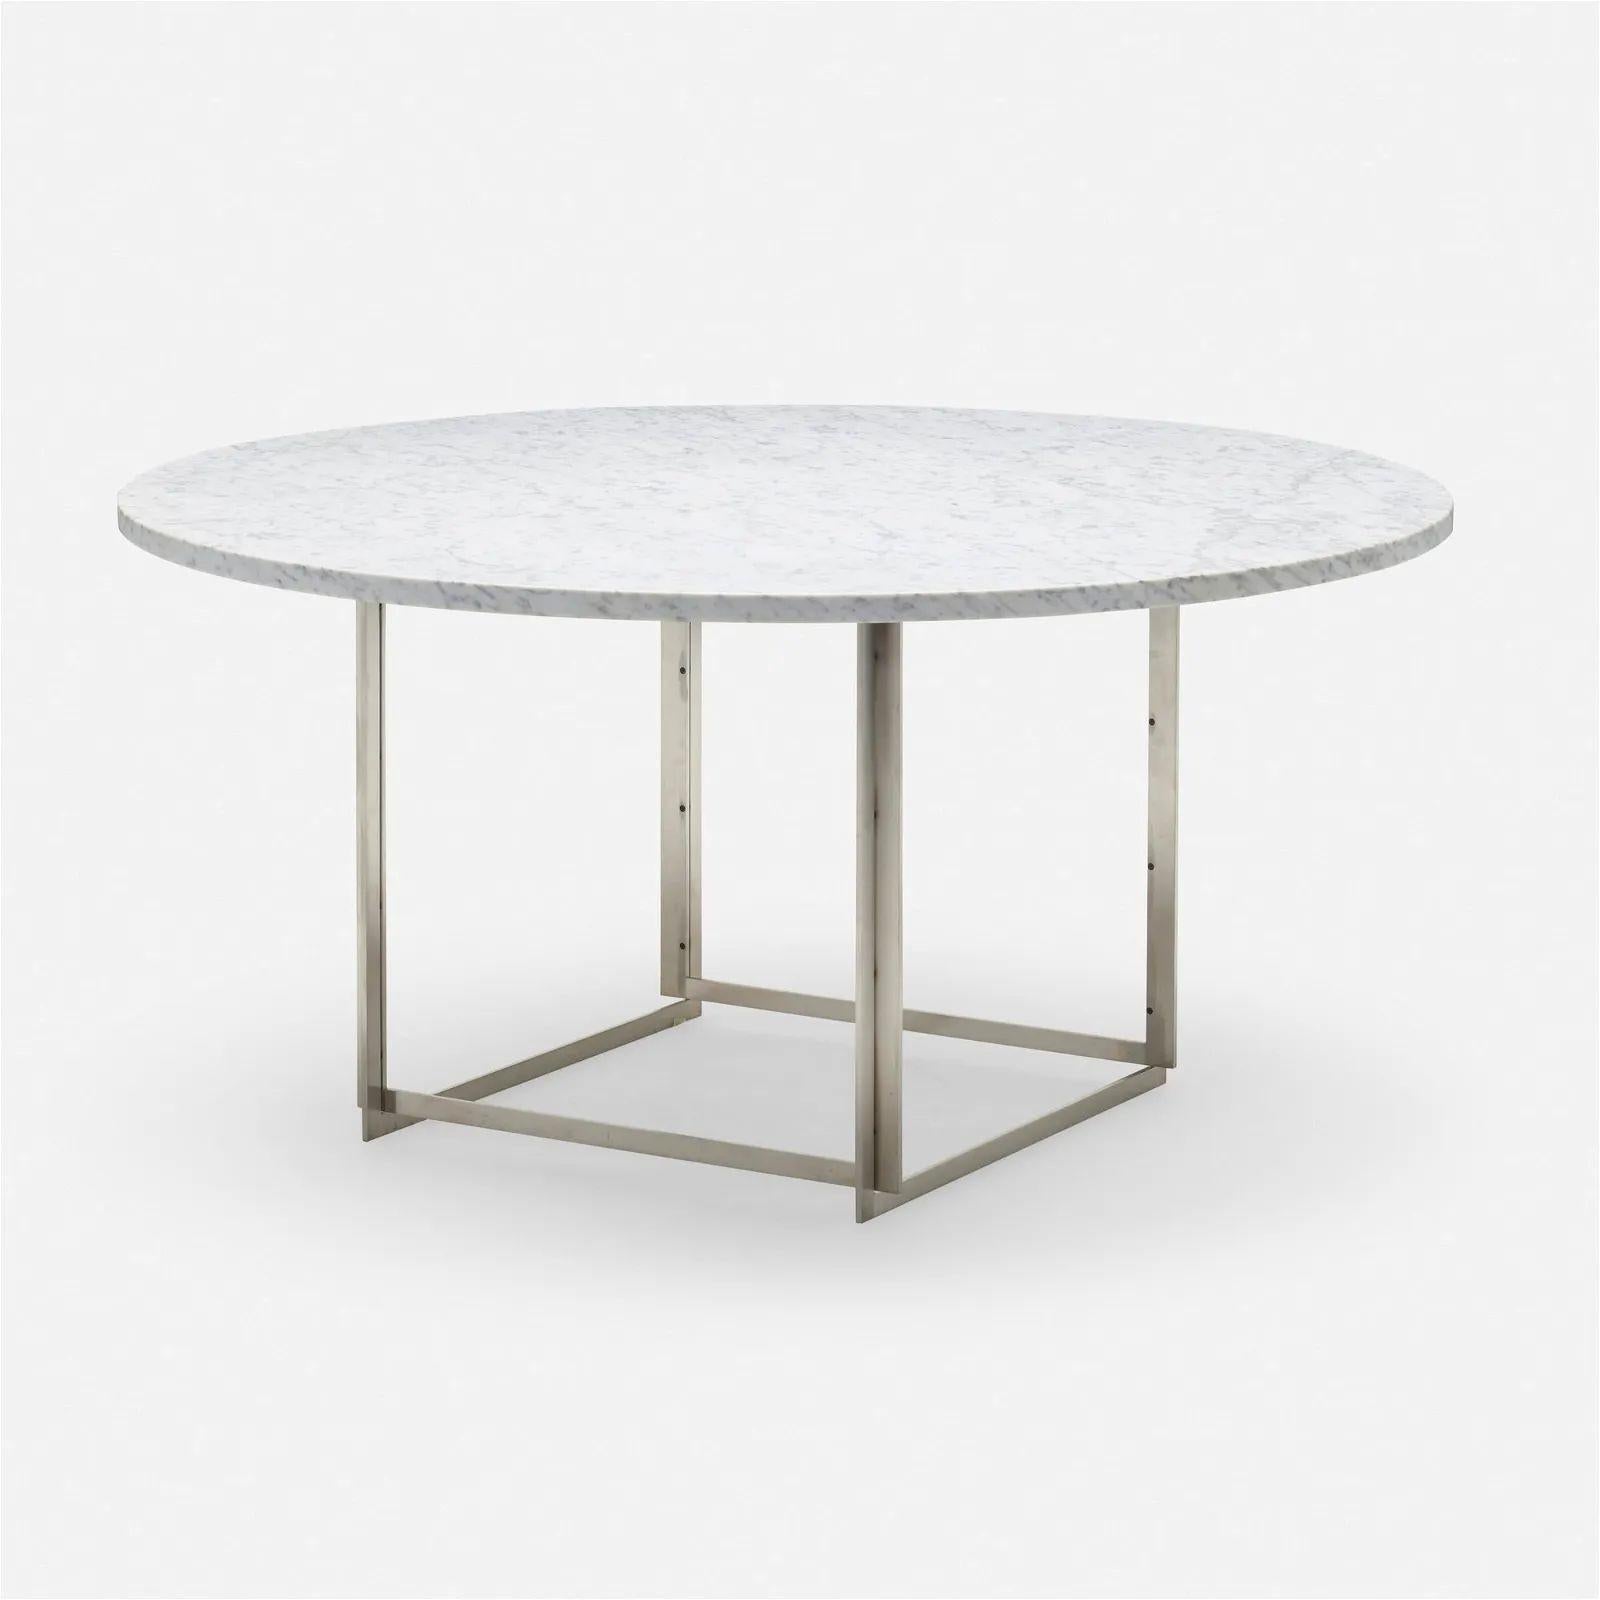 Poul Kjaerholm PK-54 Dining Table, Denmark, with Six Leaves, Labeled, Impressed Mark

Pristine condition 'PK-54' dining table with six 13 8/7-inch leaves; table extends to 82 3/4 inches in diameter when fully assembled. Decal manufacturer's label to